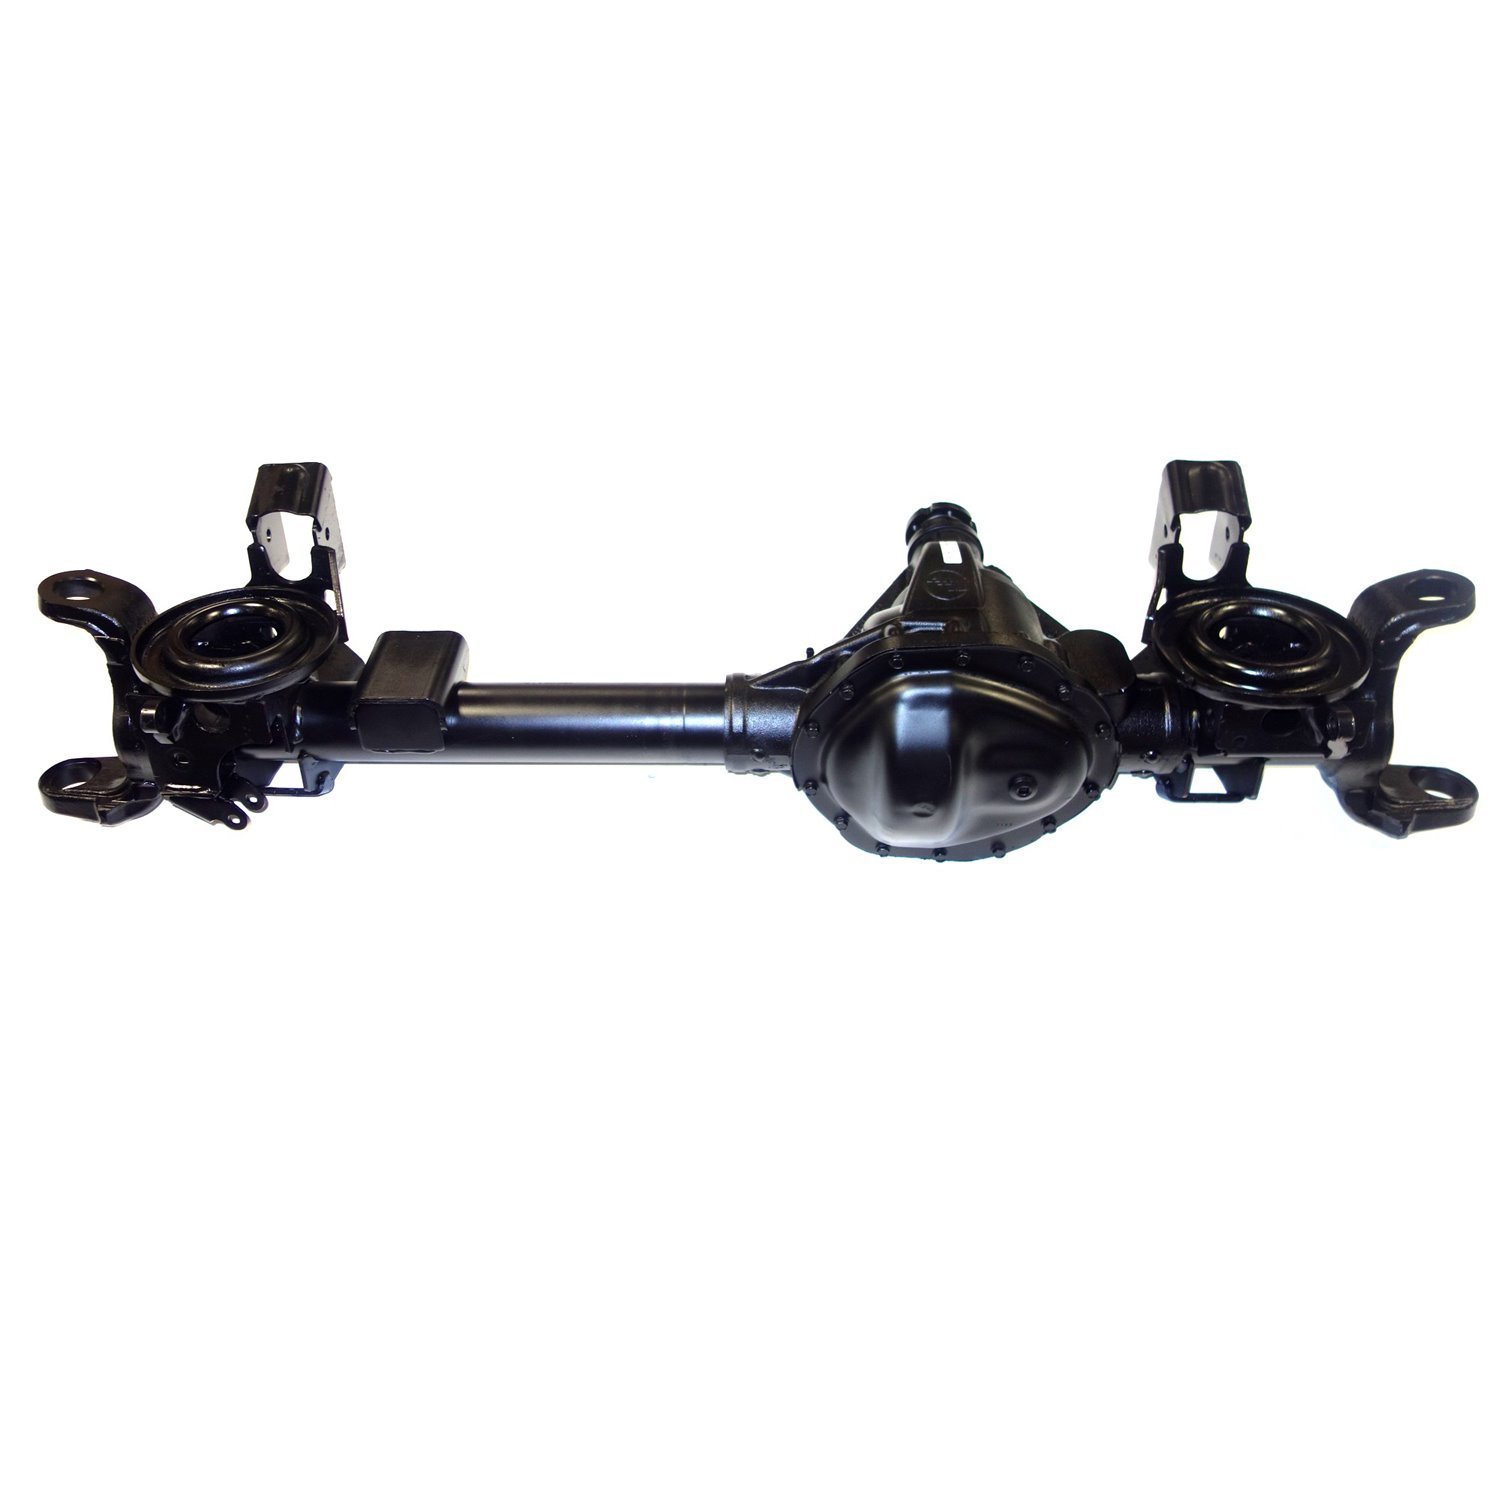 Remanufactured Front Axle Assembly 2010-2011 Chrysler 4.11 Ratio